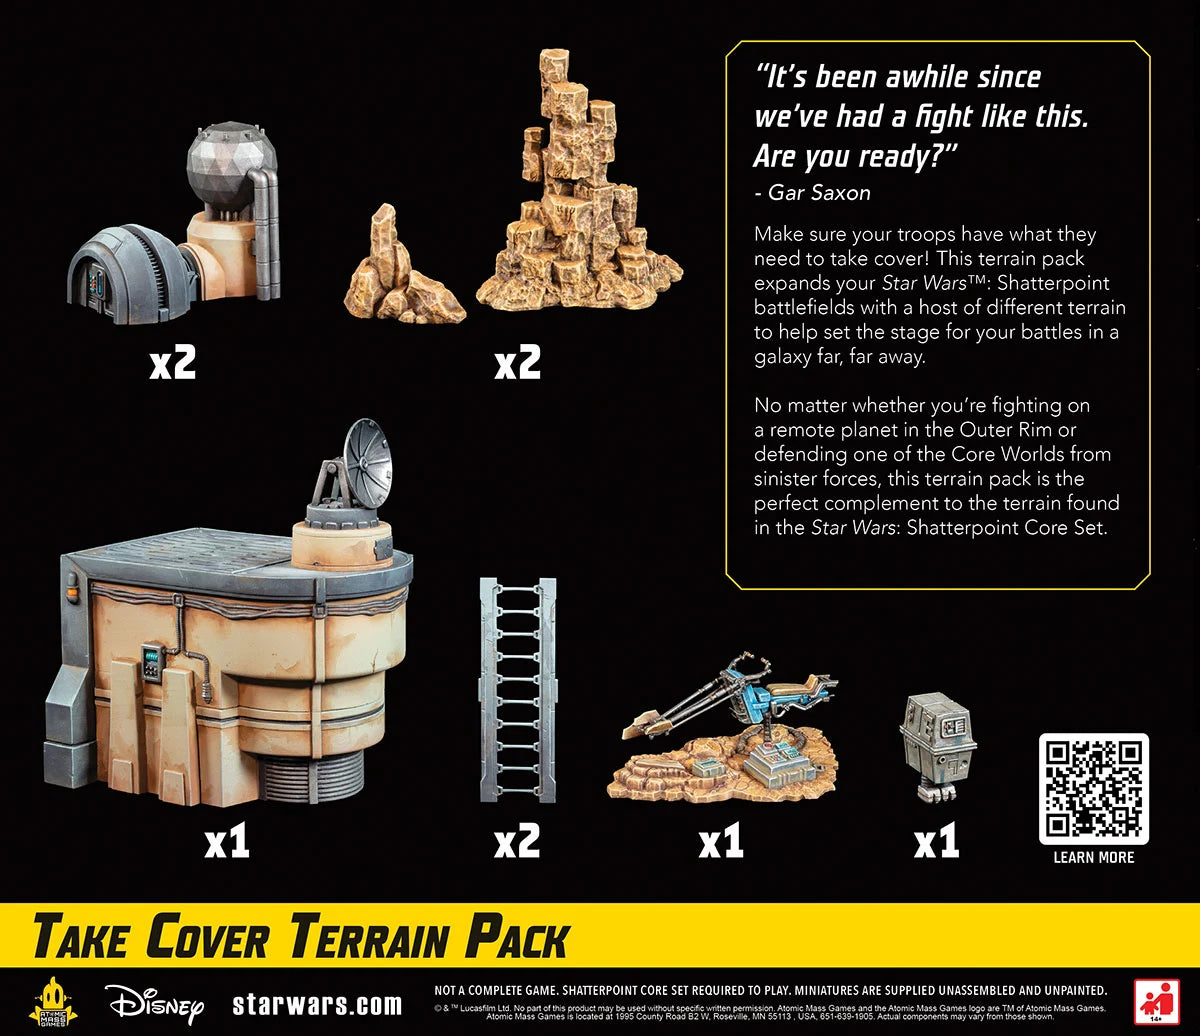 Star Wars: Shatterpoint – Take Cover Terrain Pack